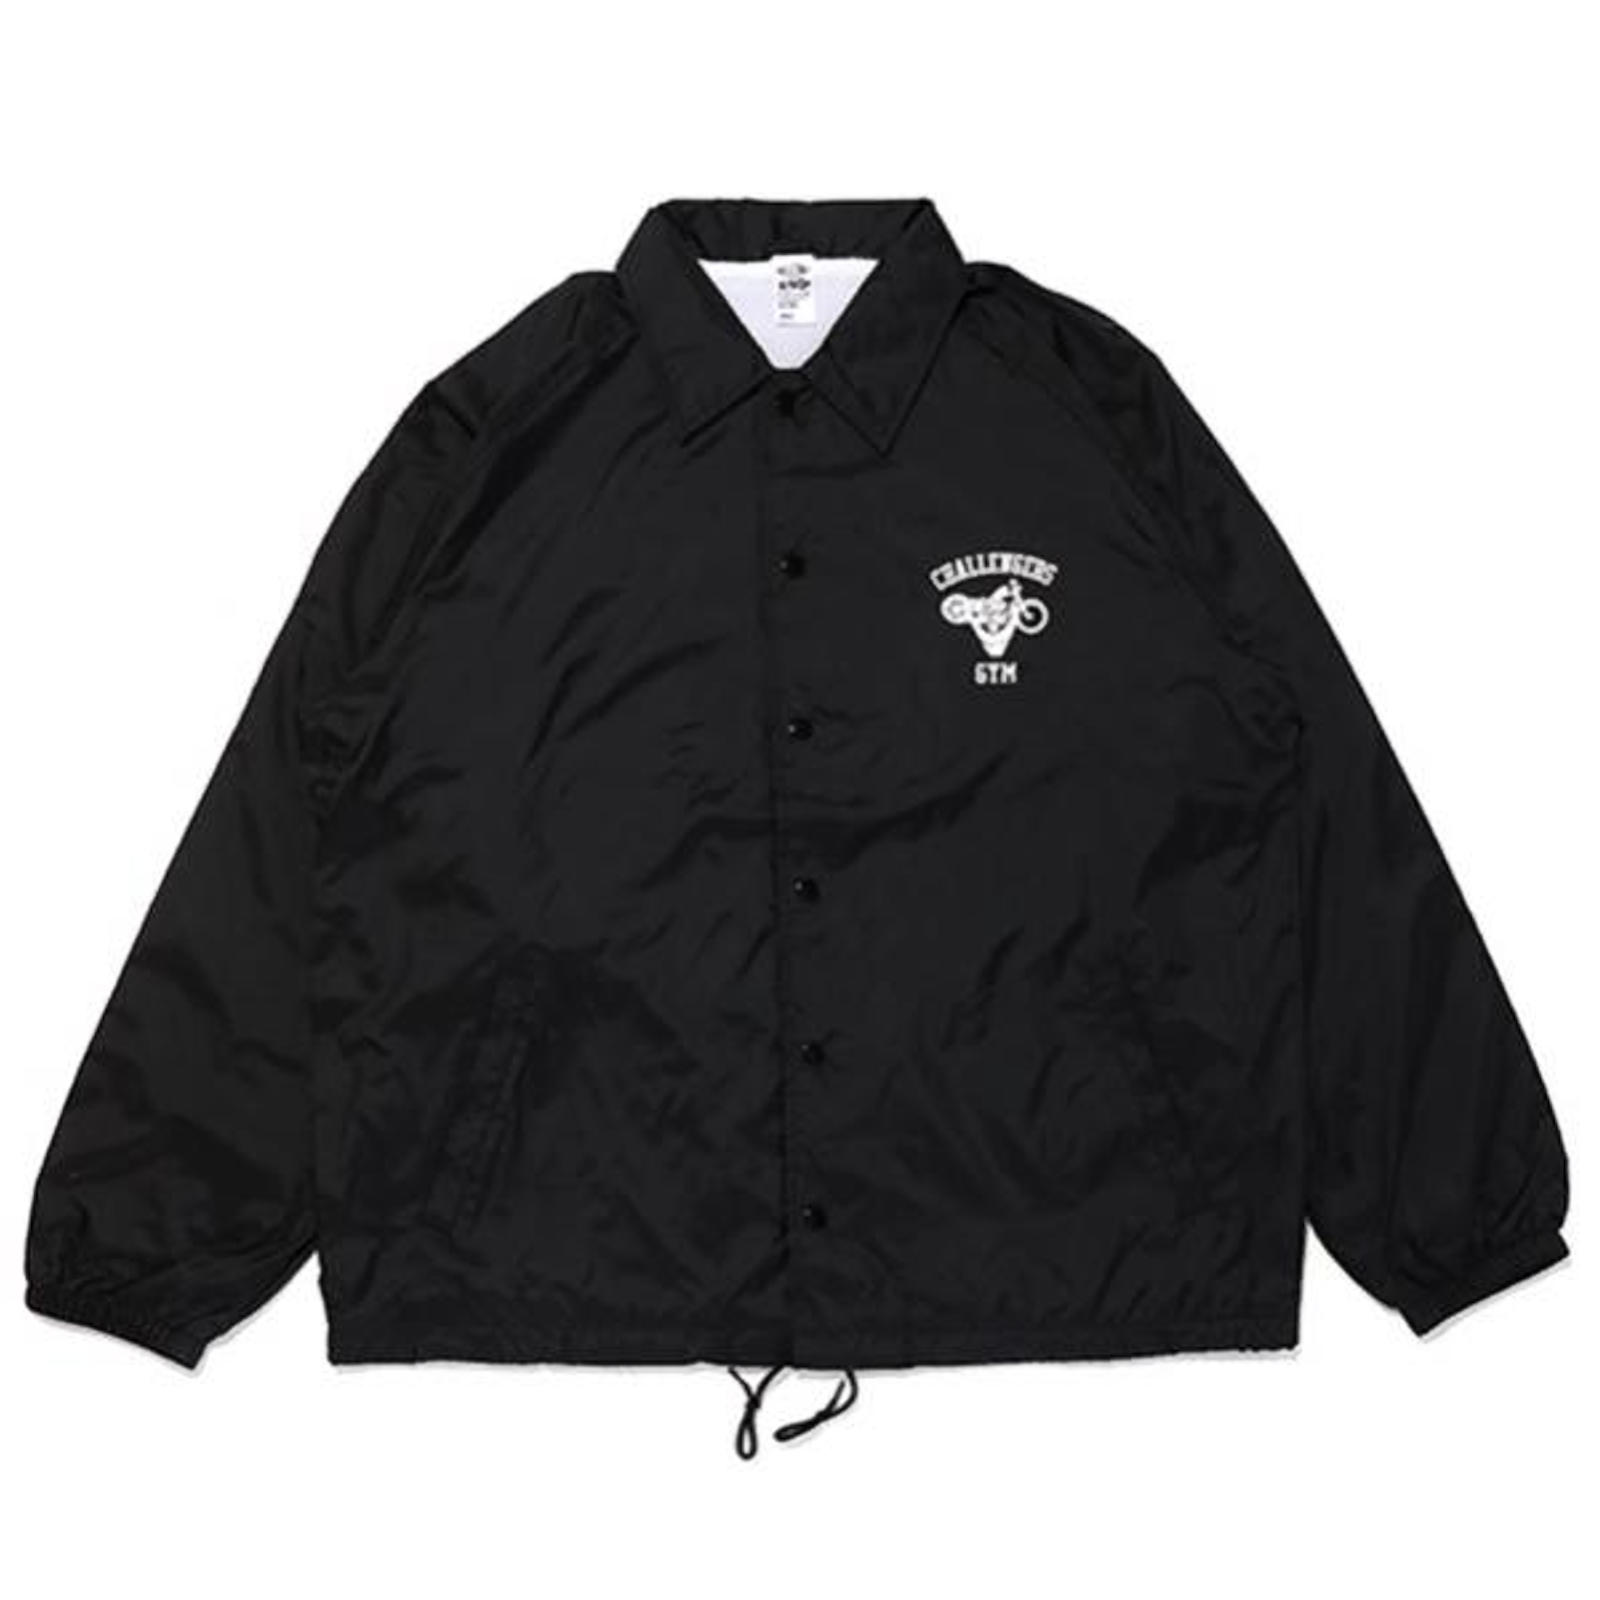 CHALLENGER GYM COACH JACKET | www.kinderpartys.at